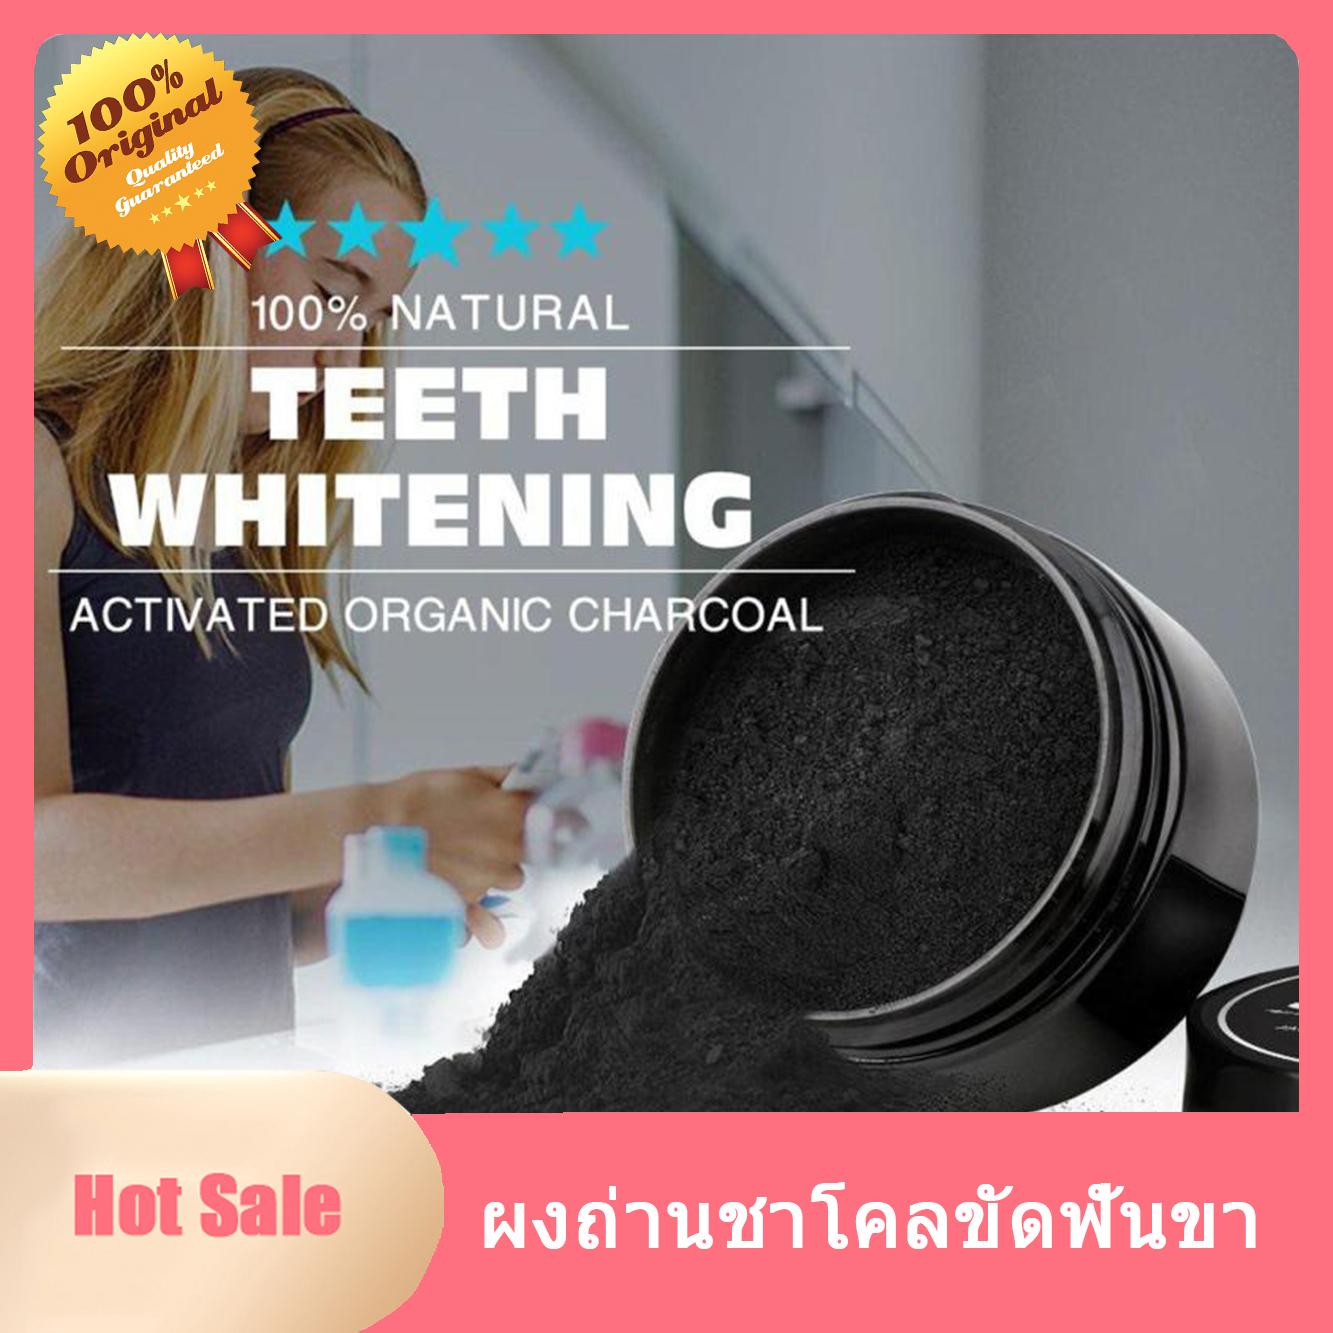 30G Activated Powder Whitening Cleansing Coconut Packing Use Daily Tools Set Premium Makeup Set